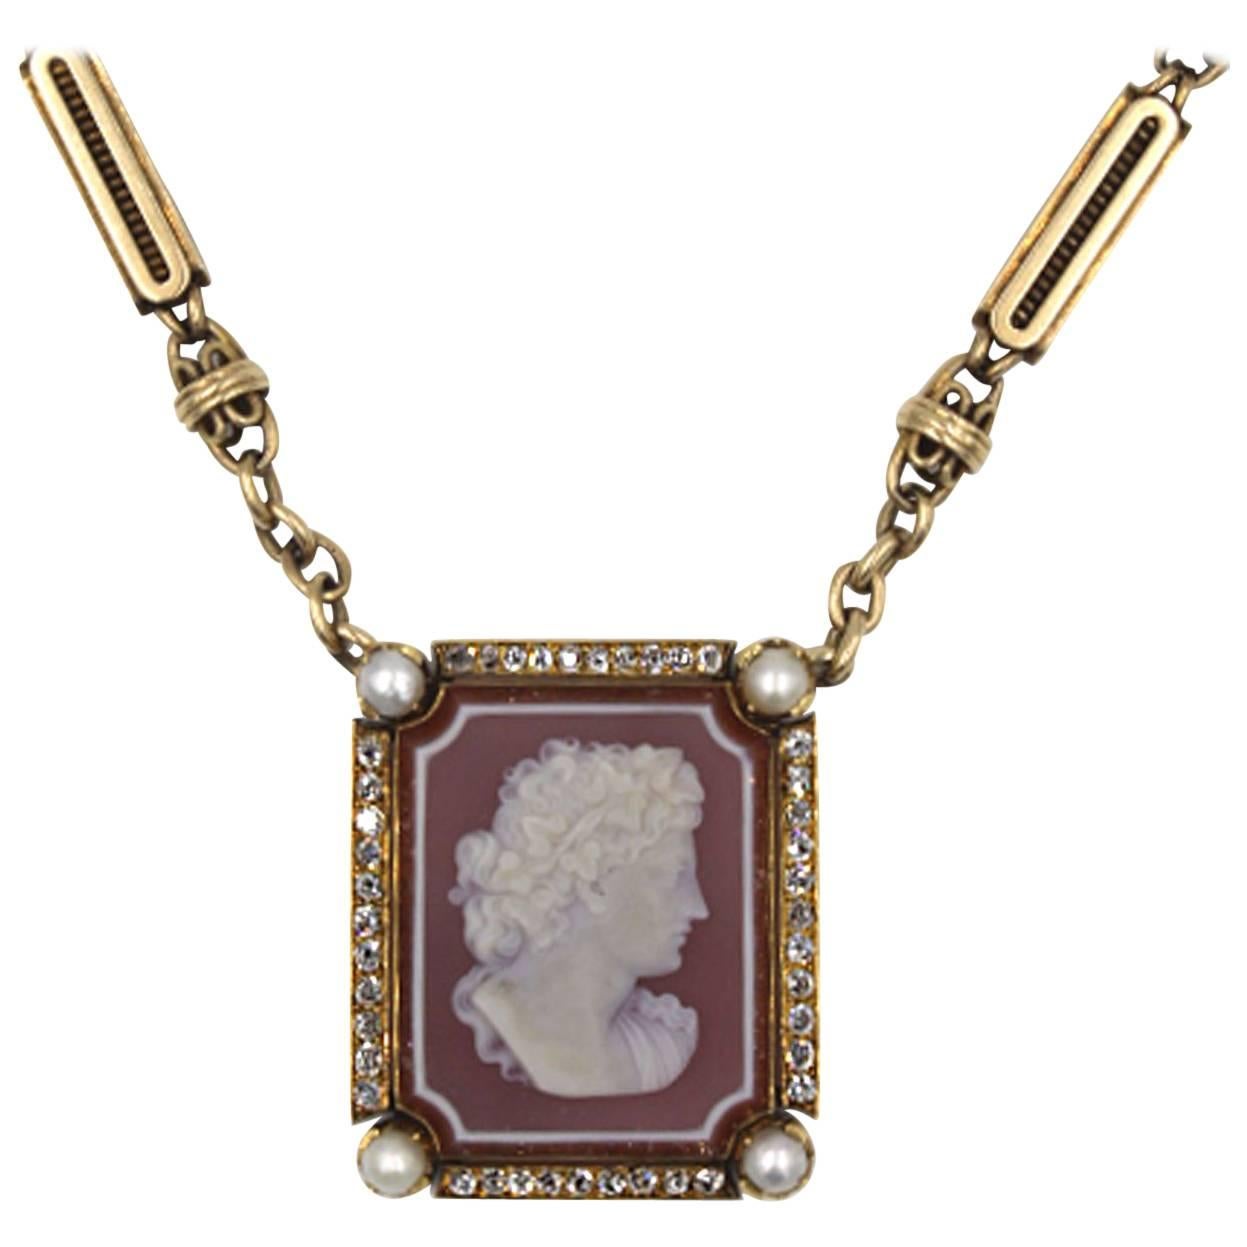 Antique Cameo Diamond Gold Pendant and Old Watch Chain